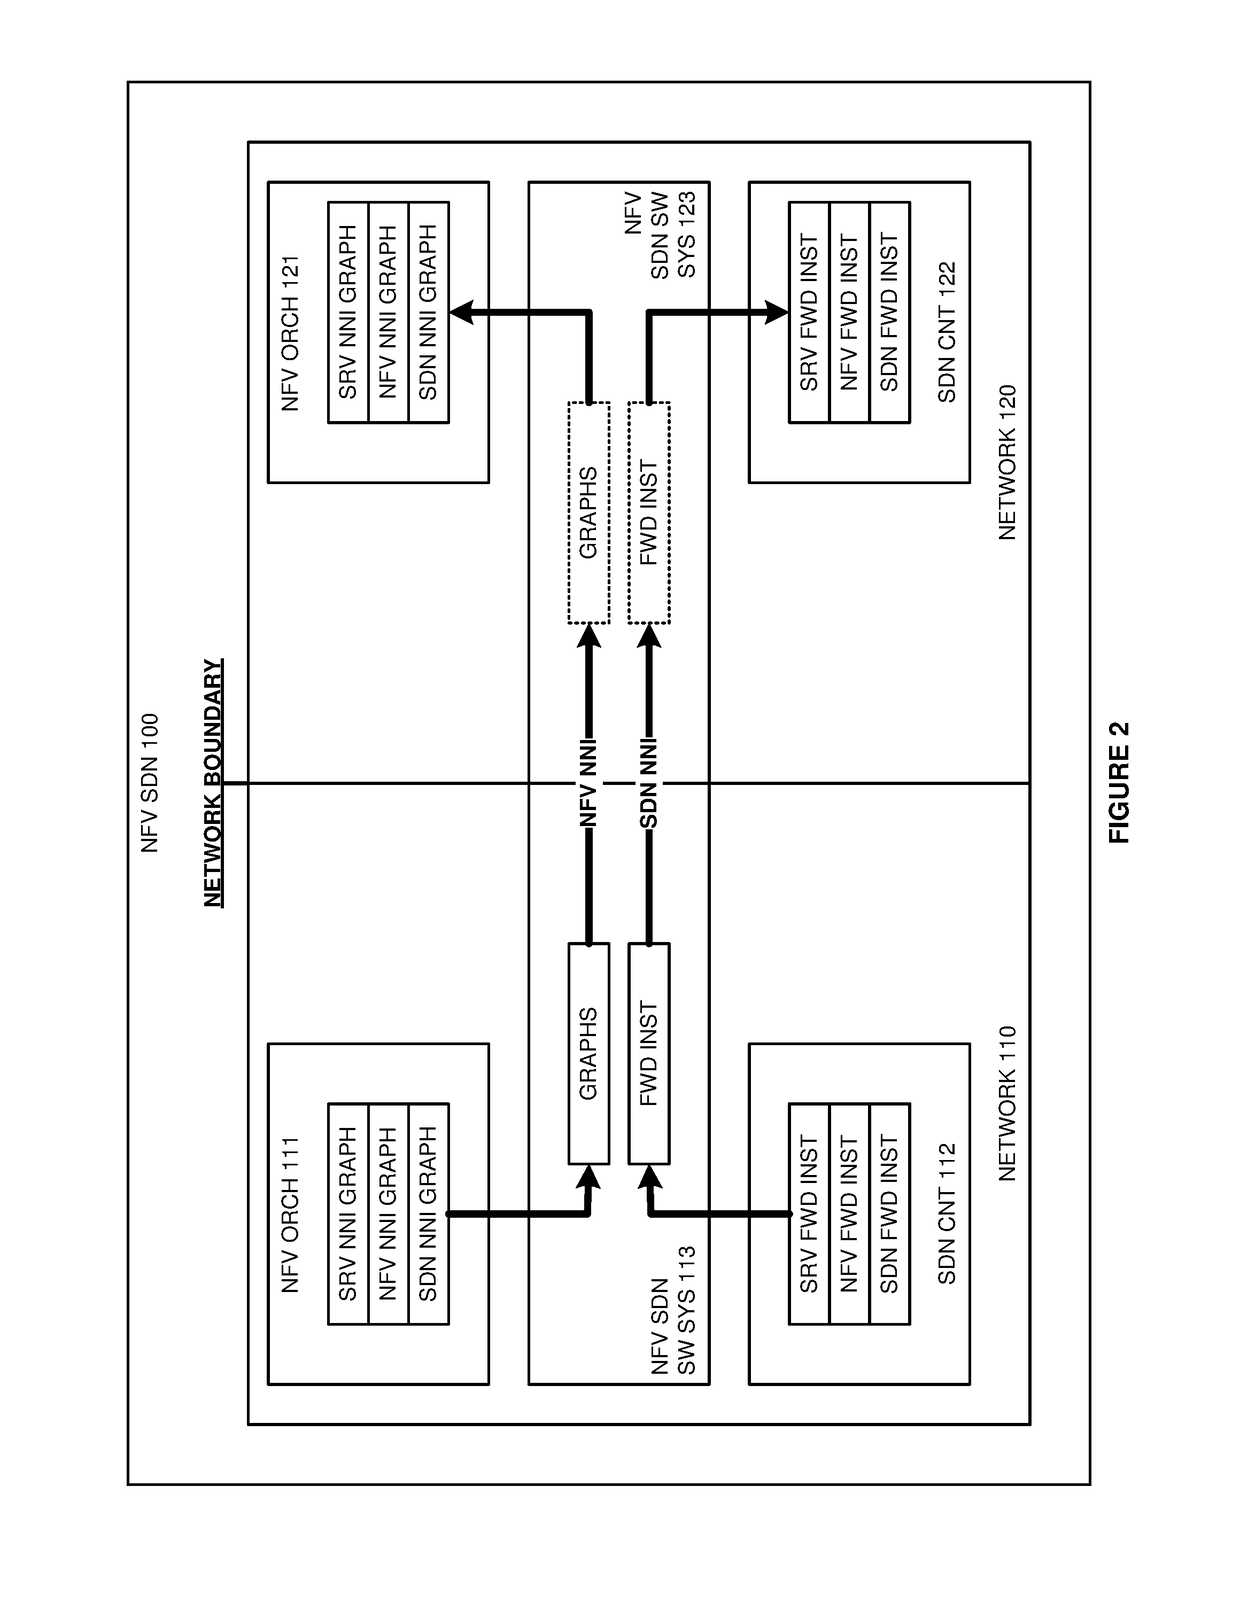 Network function virtualization (NFV) software-defined network (SDN) network-to-network interfaces (NNIs)